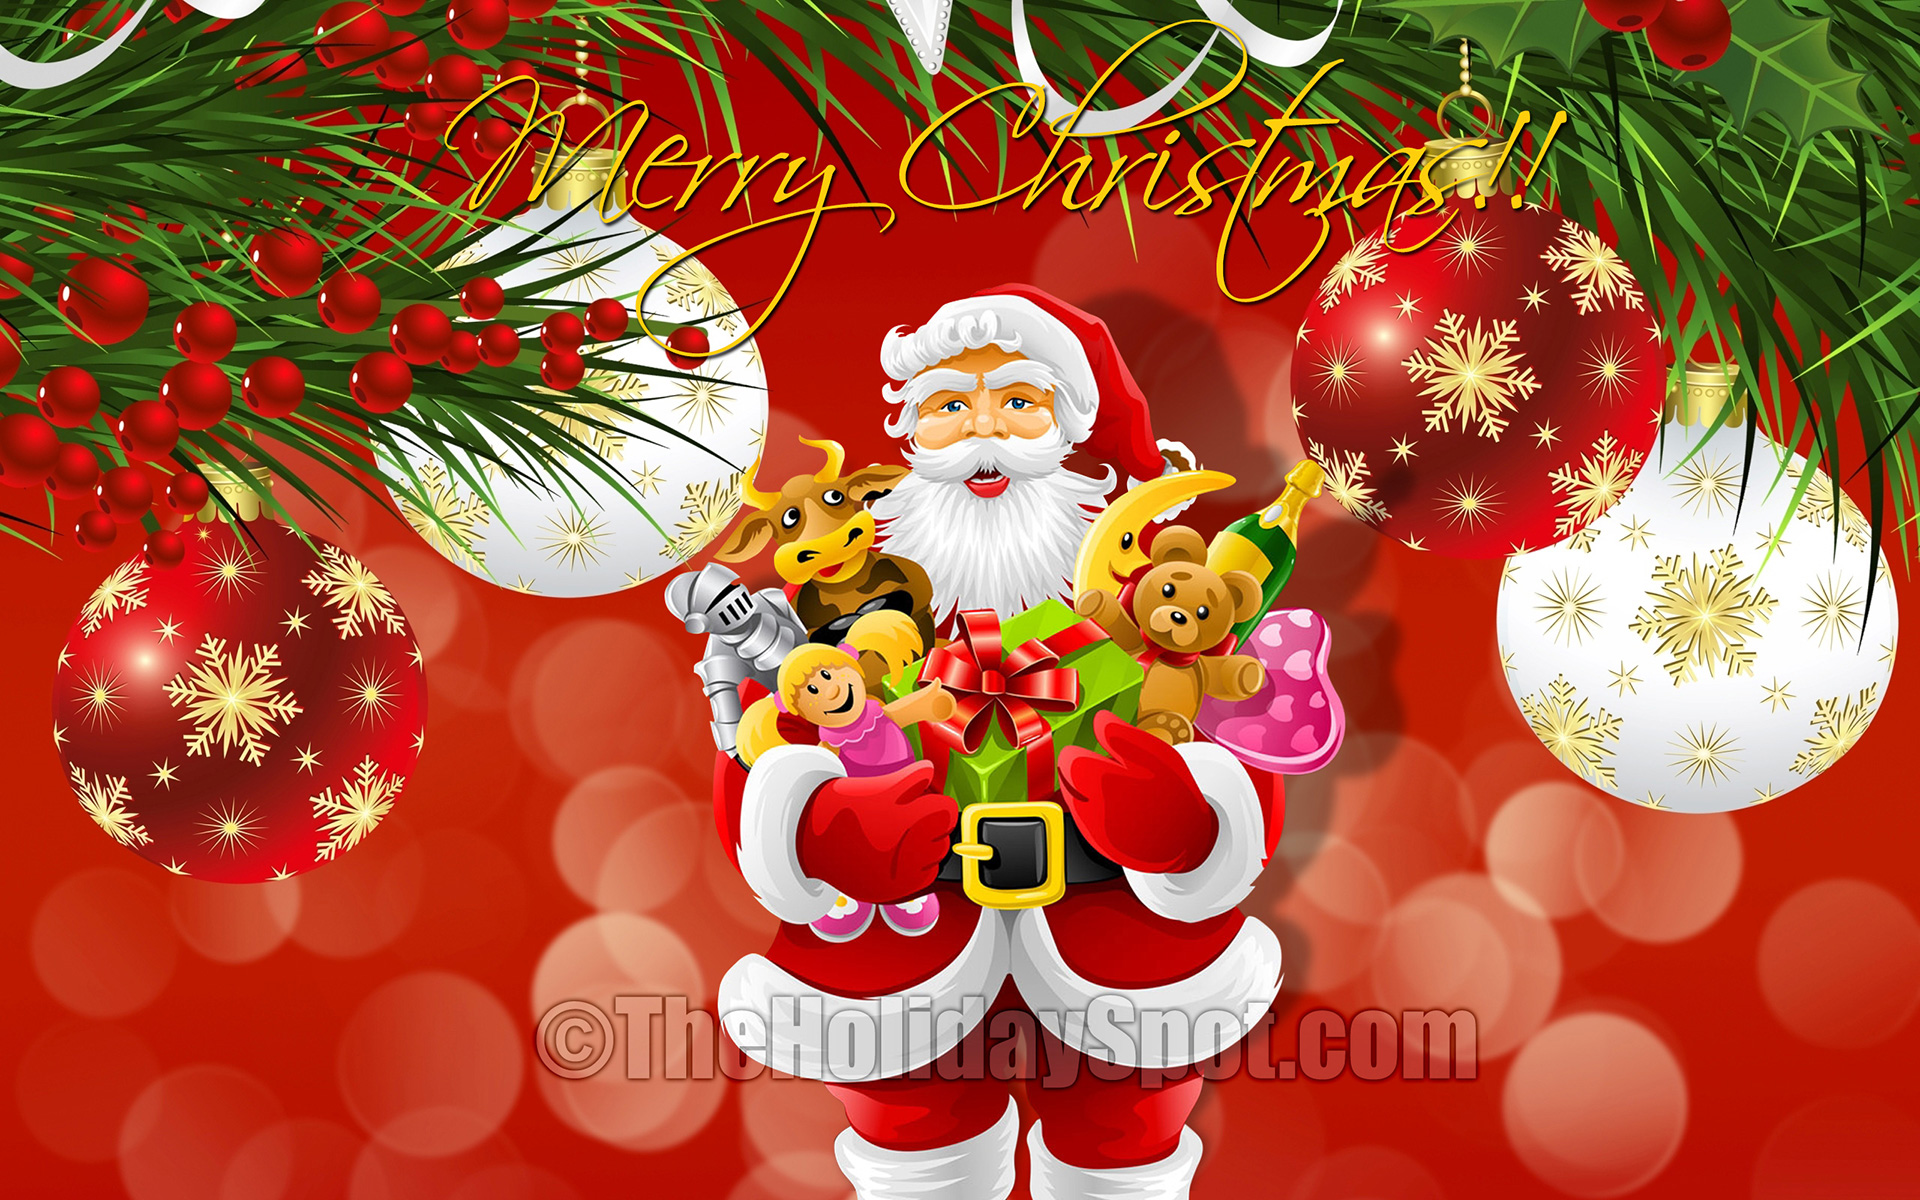 wishes from santa image